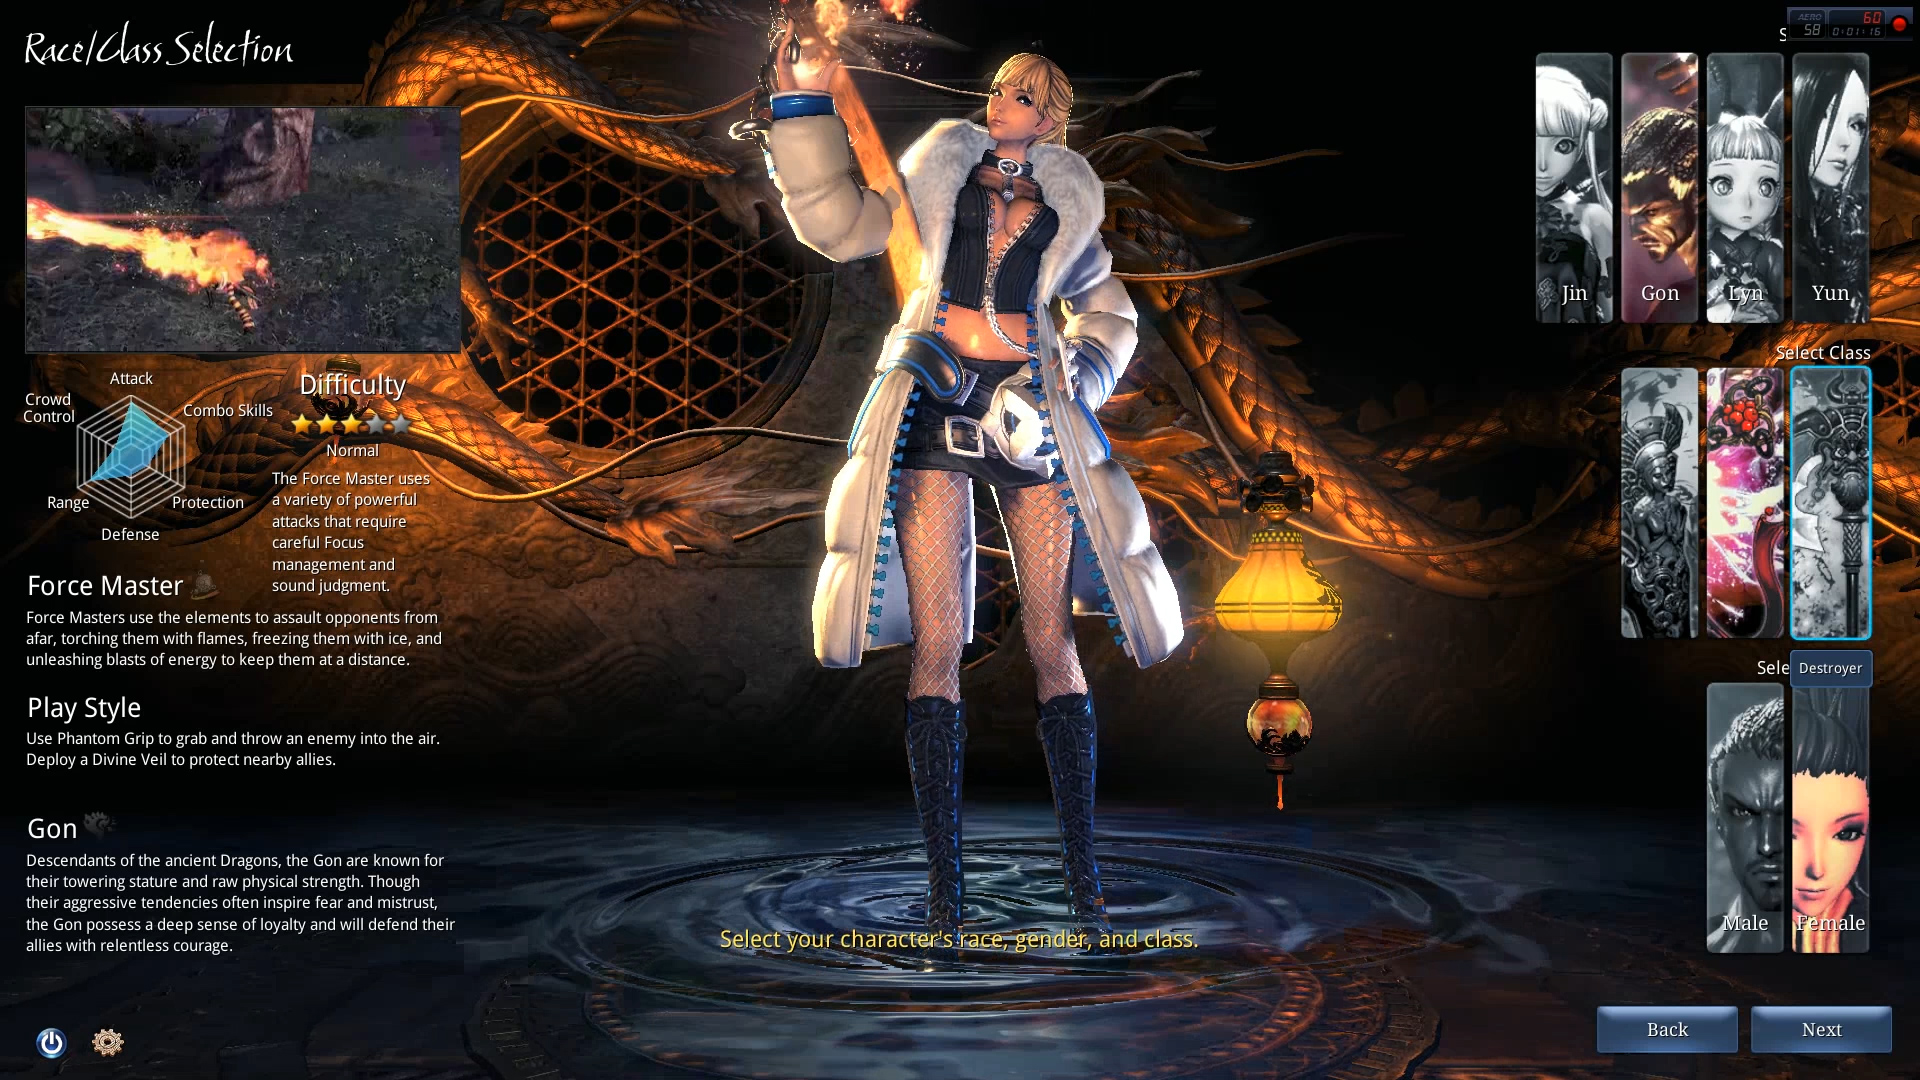 Nice Images Collection: Blade & Soul Desktop Wallpapers